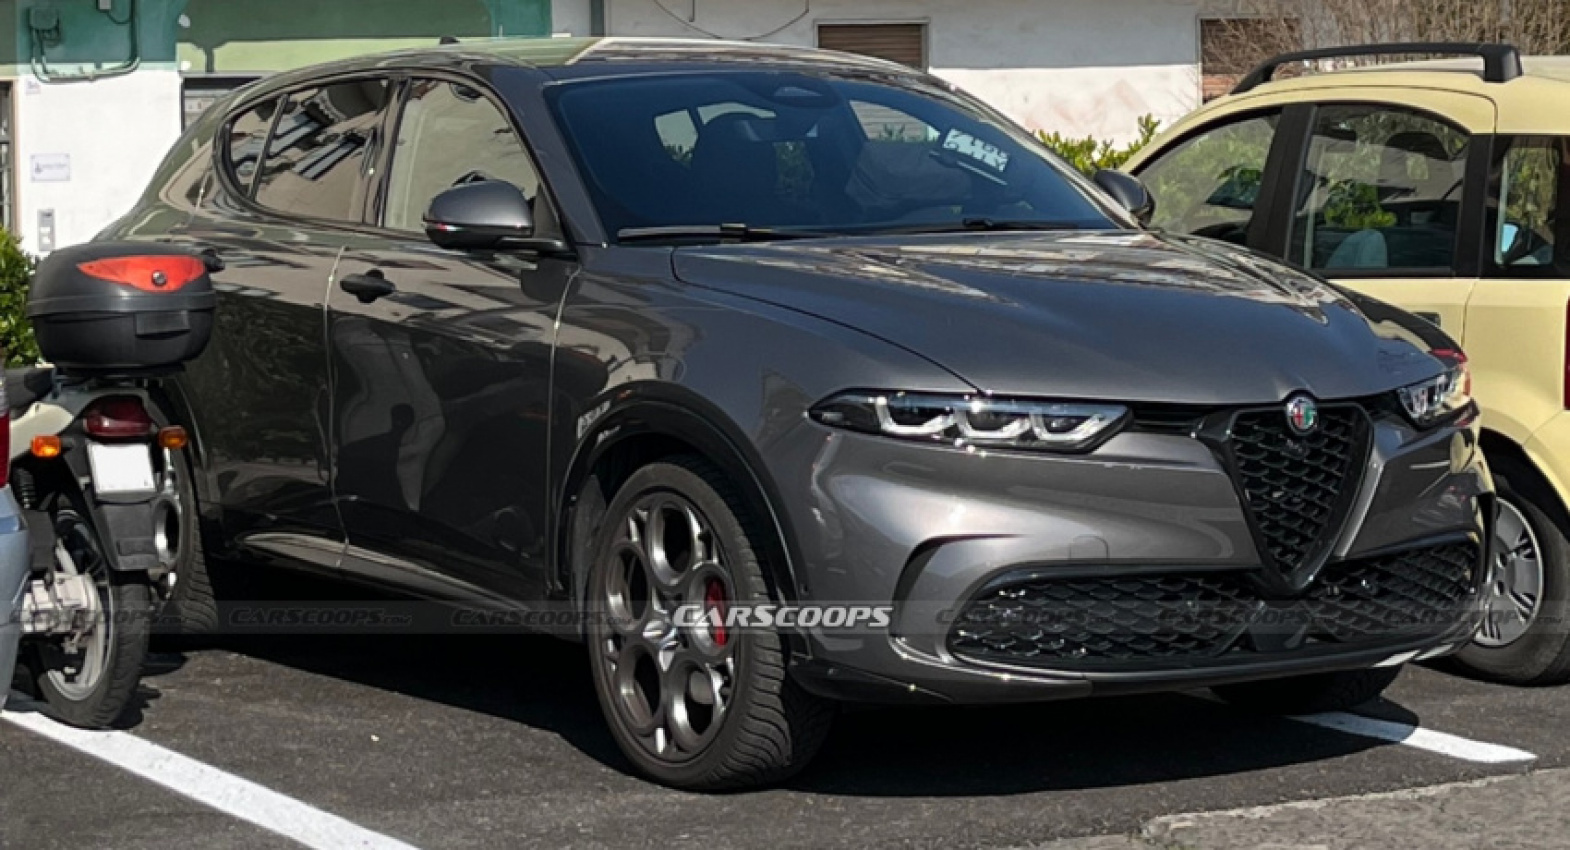 alfa romeo, autos, cars, news, alfa romeo tonale, buick, cadillac, feature, porsche taycan, porsche videos, video, alfa romeo toe-nail? italian suv is the latest in a long line of cars names that are too easy to get wrong